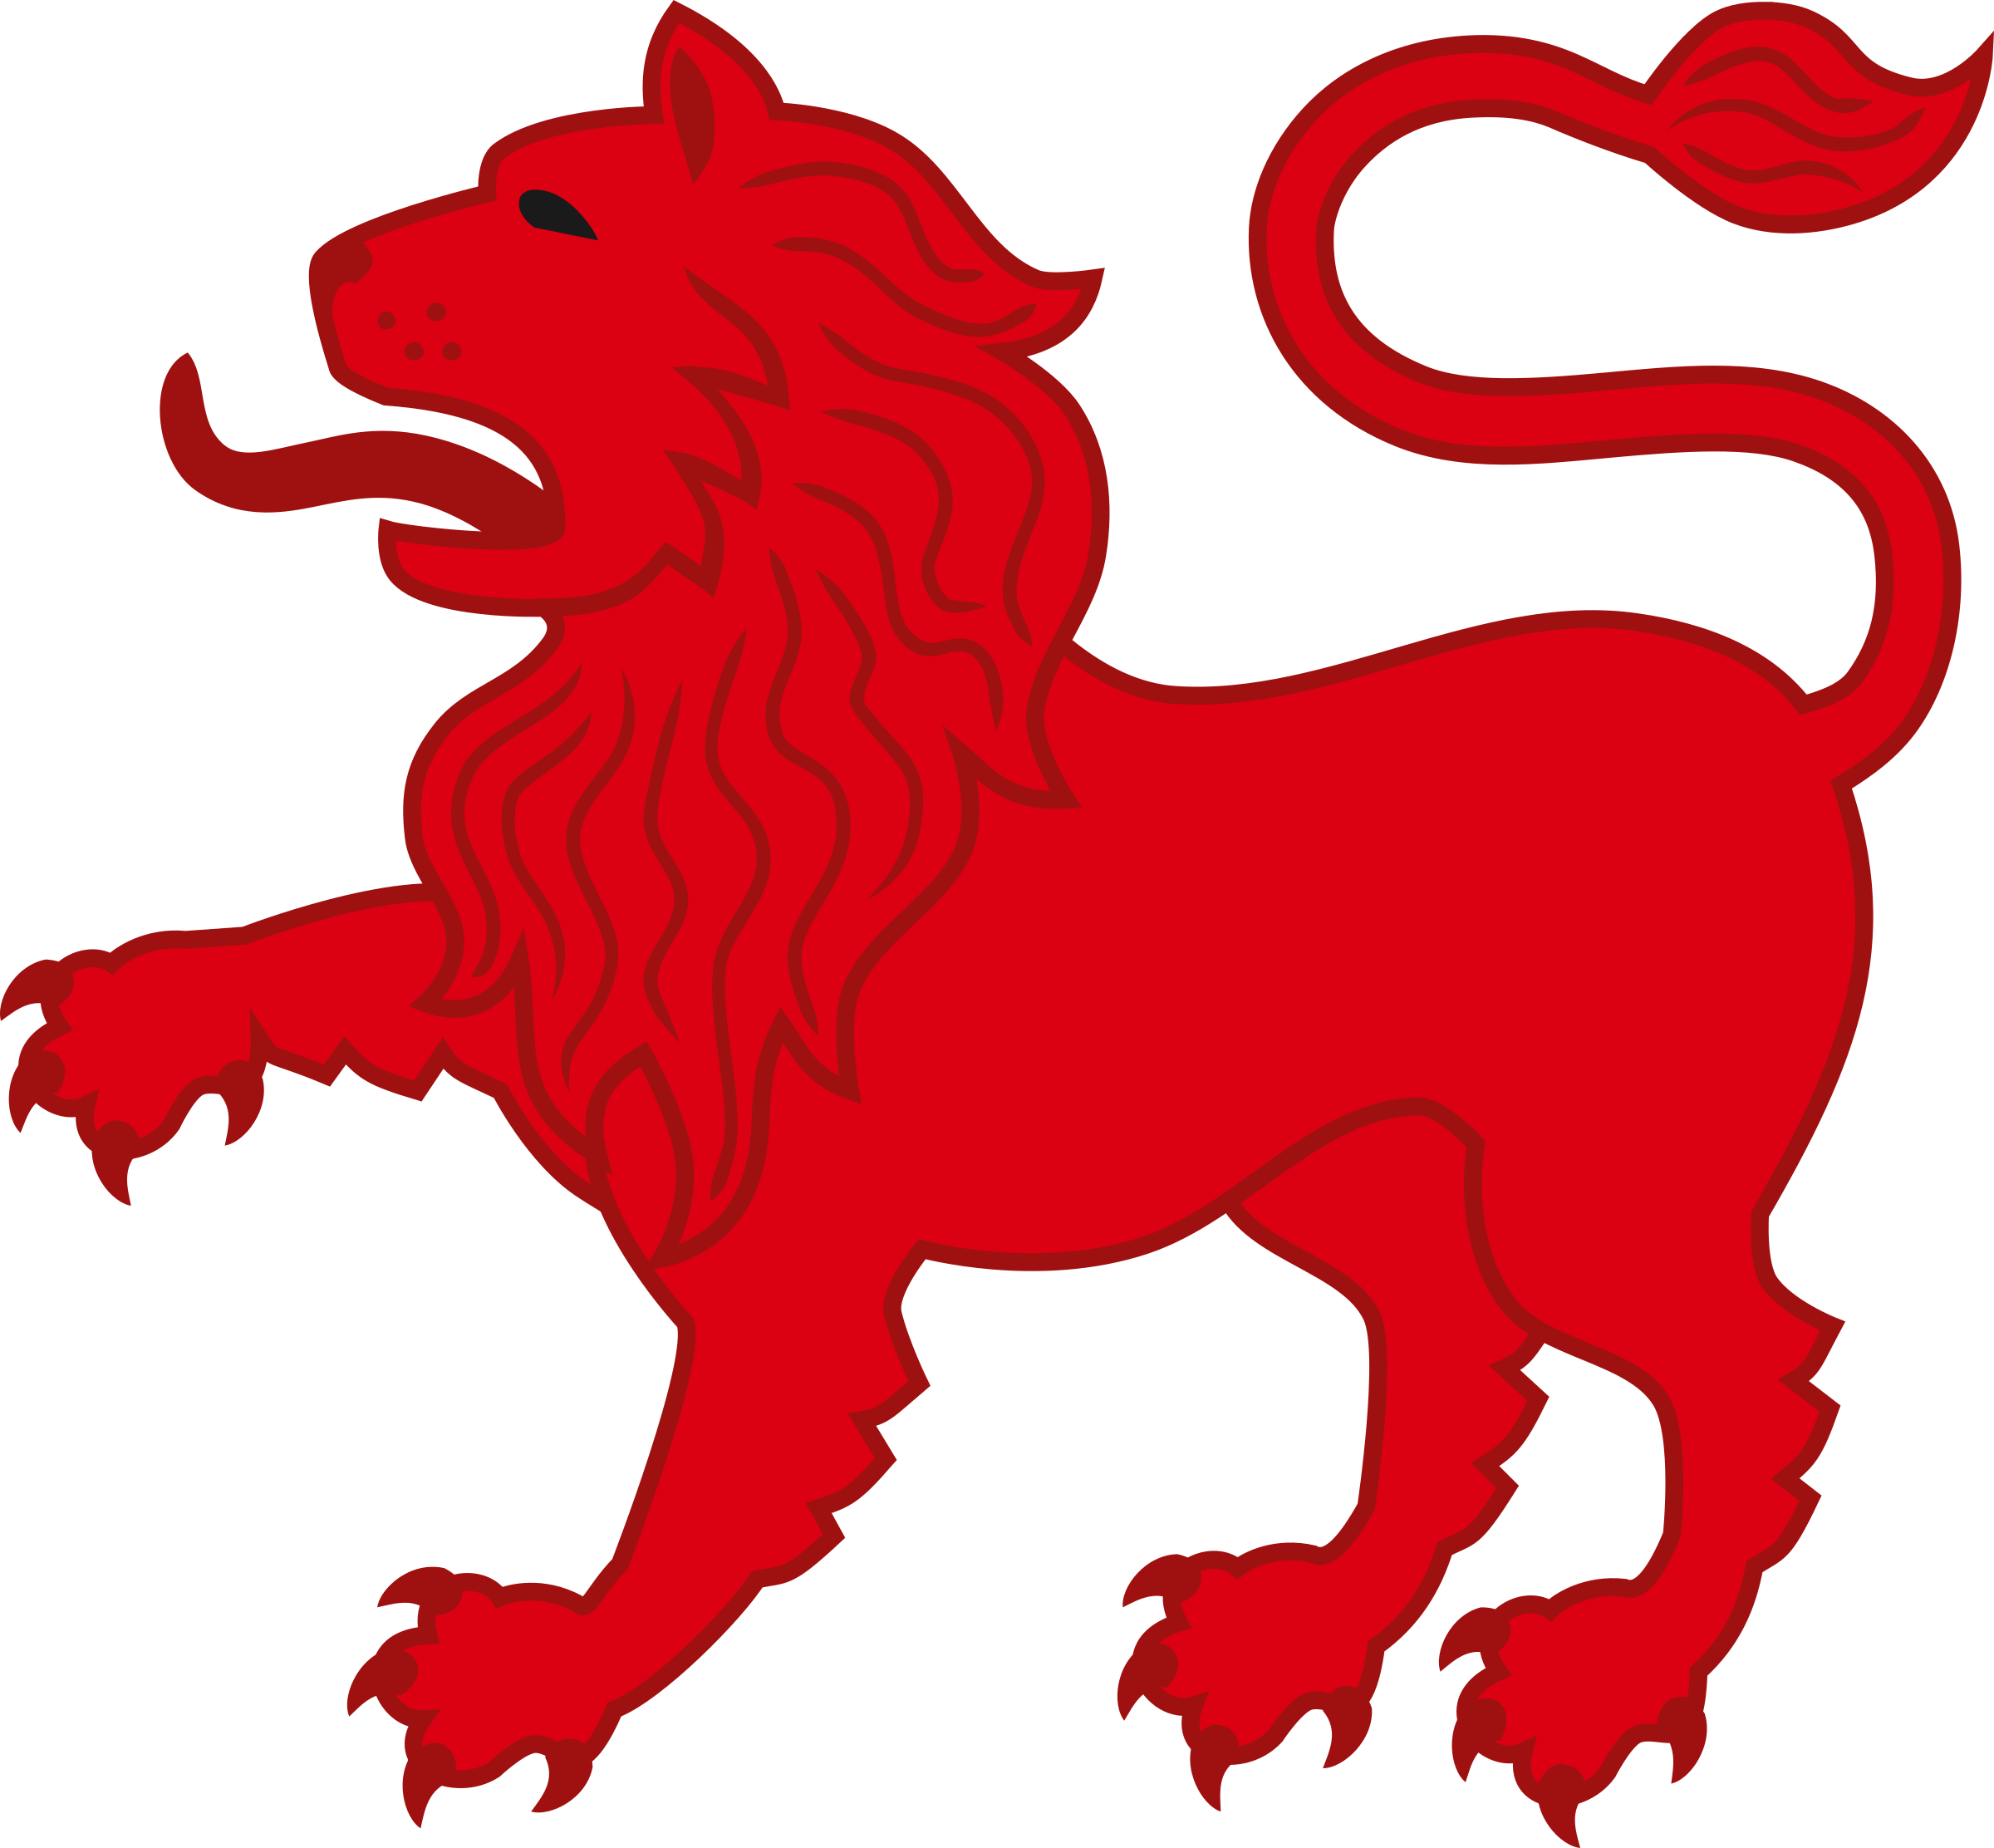 Big image png. Lion clipart red